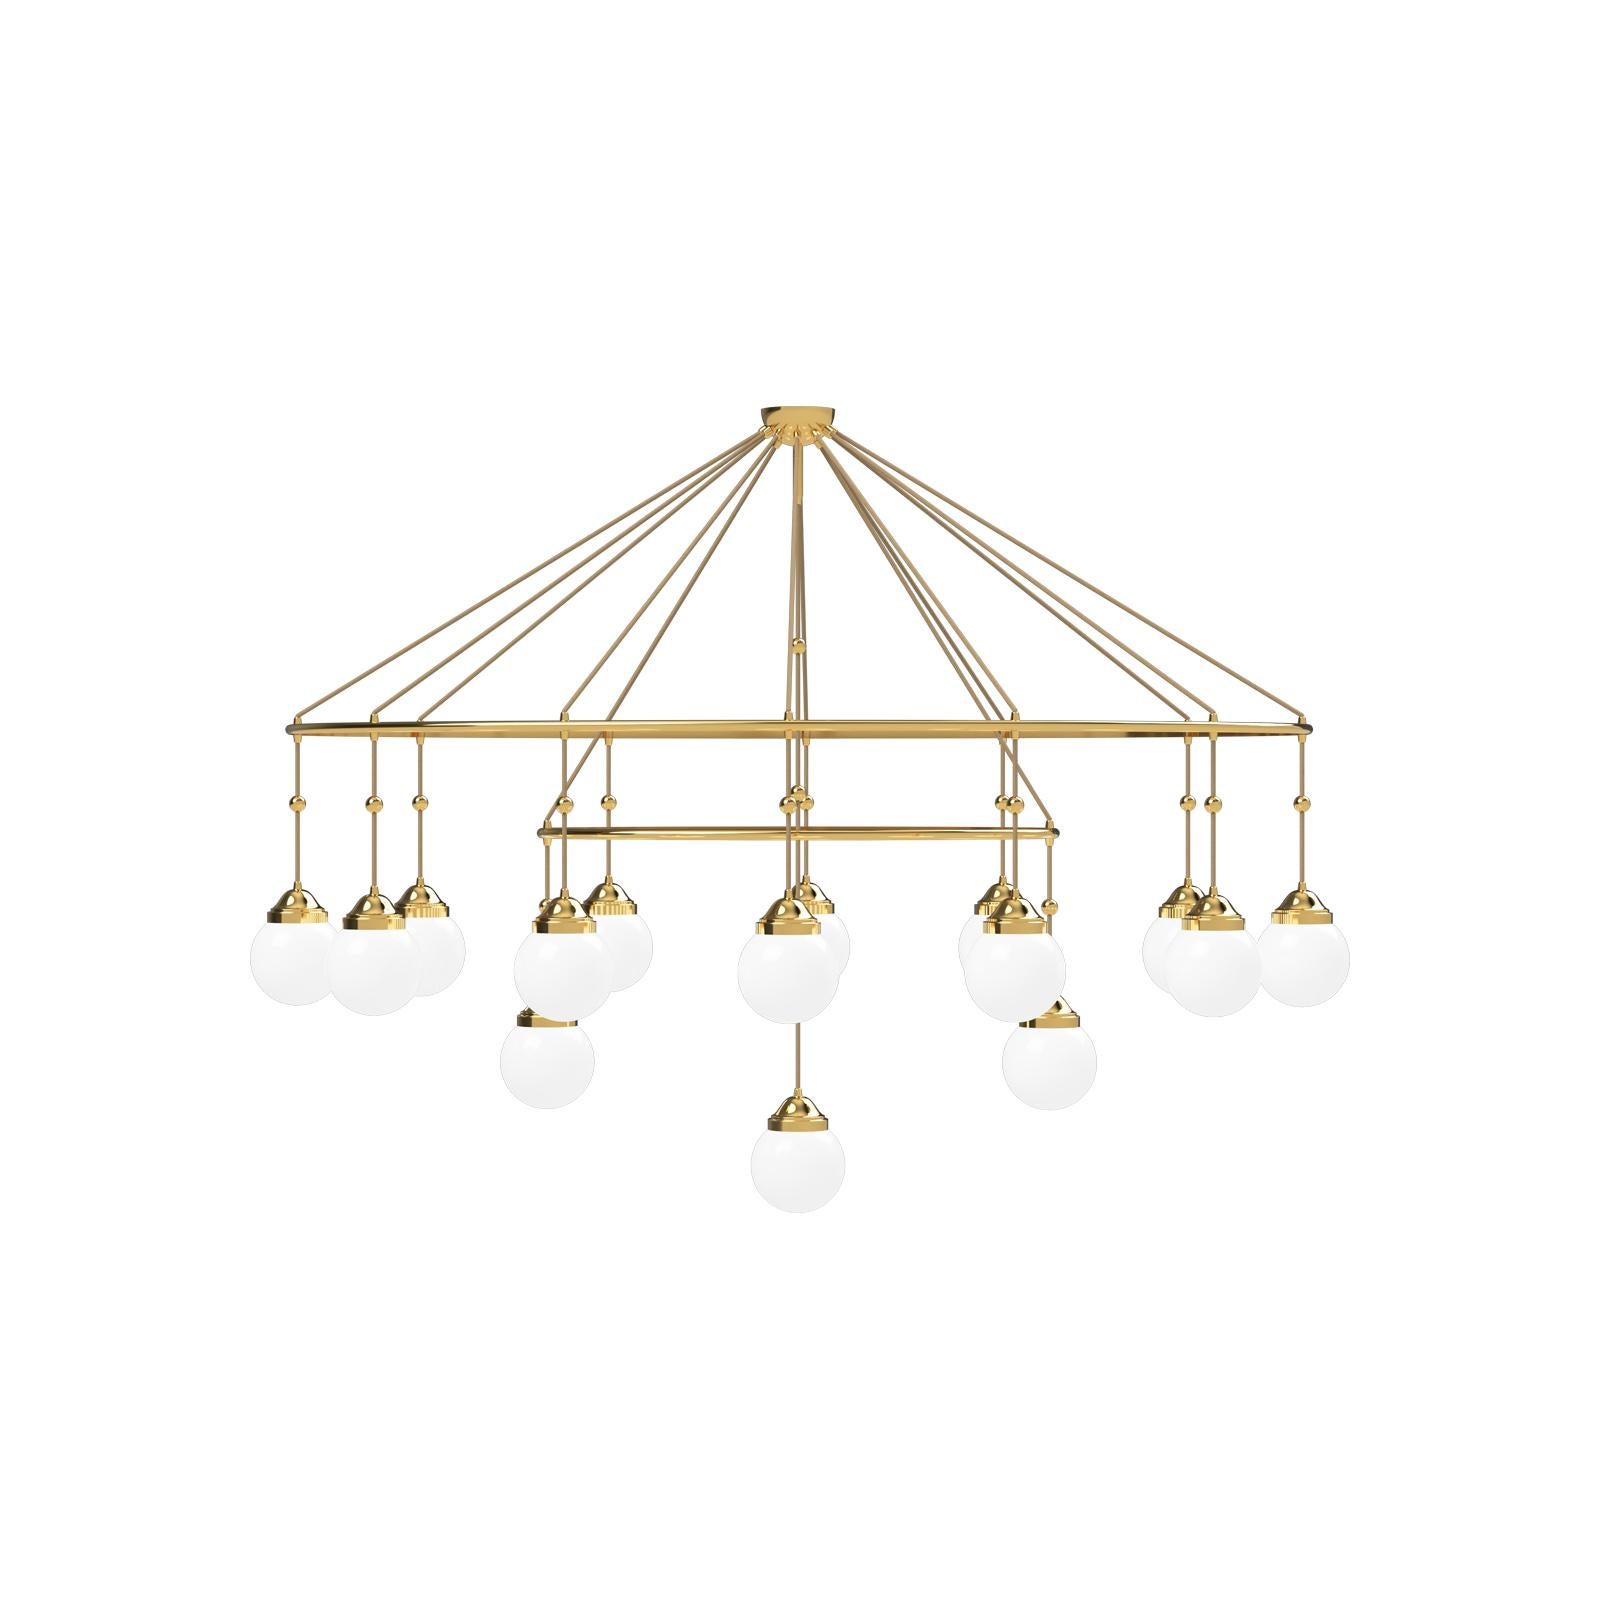 A variation of the classical Brioni chandelier by Adolf Loos 1914, re edtion
All components according to the UL regulations, with an additional charge we will UL-list and label our fixtures.